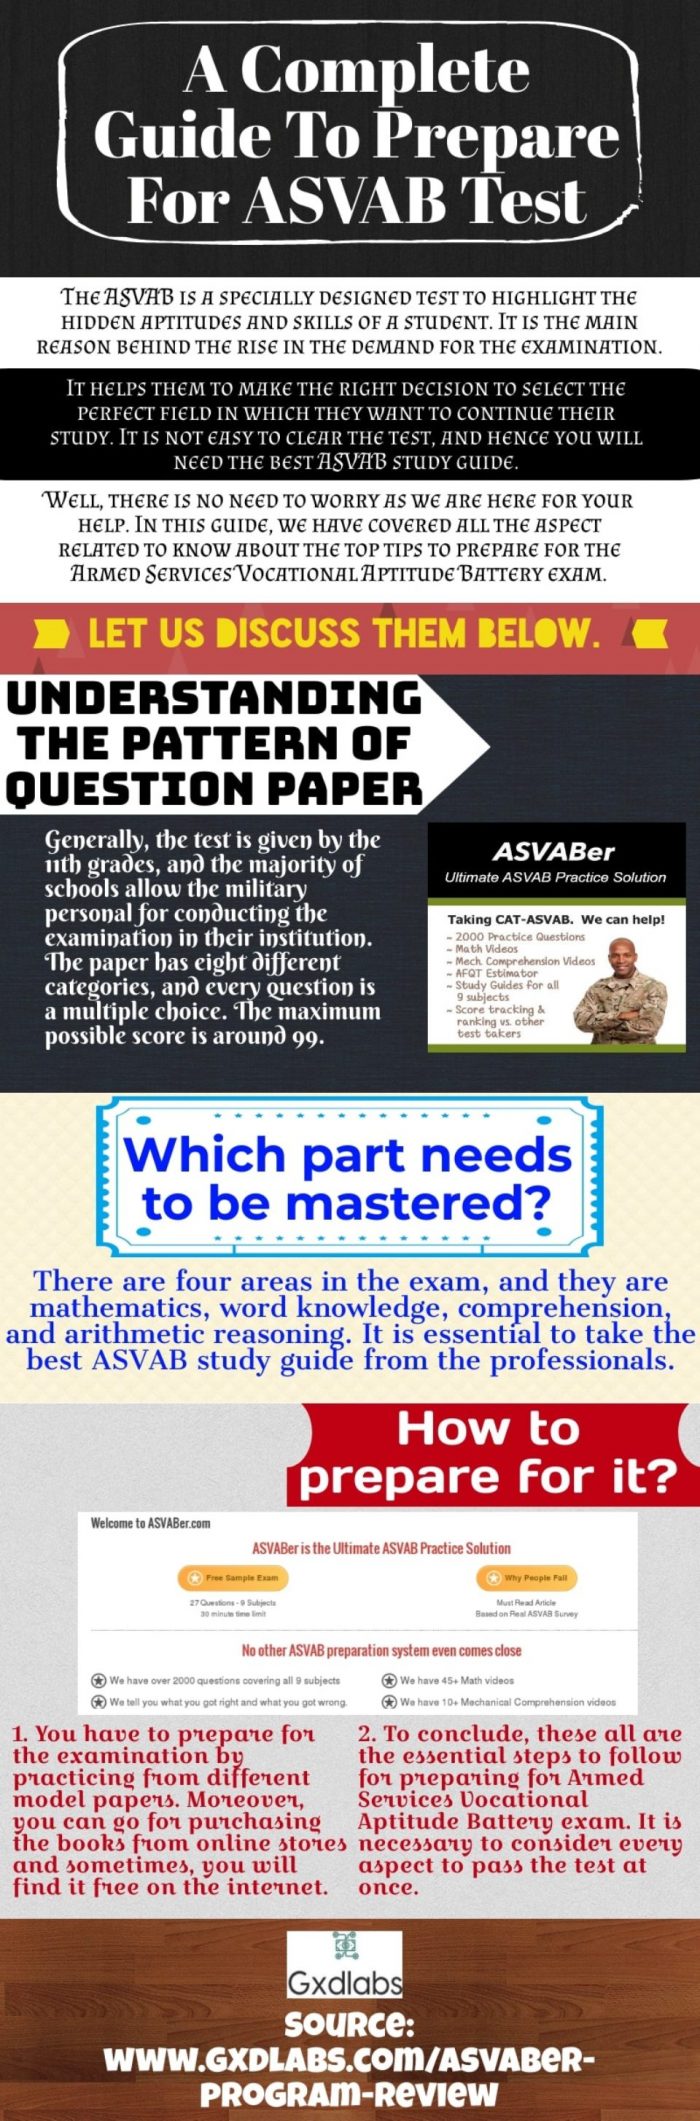 Take the best ASVAB study guide from the professionals